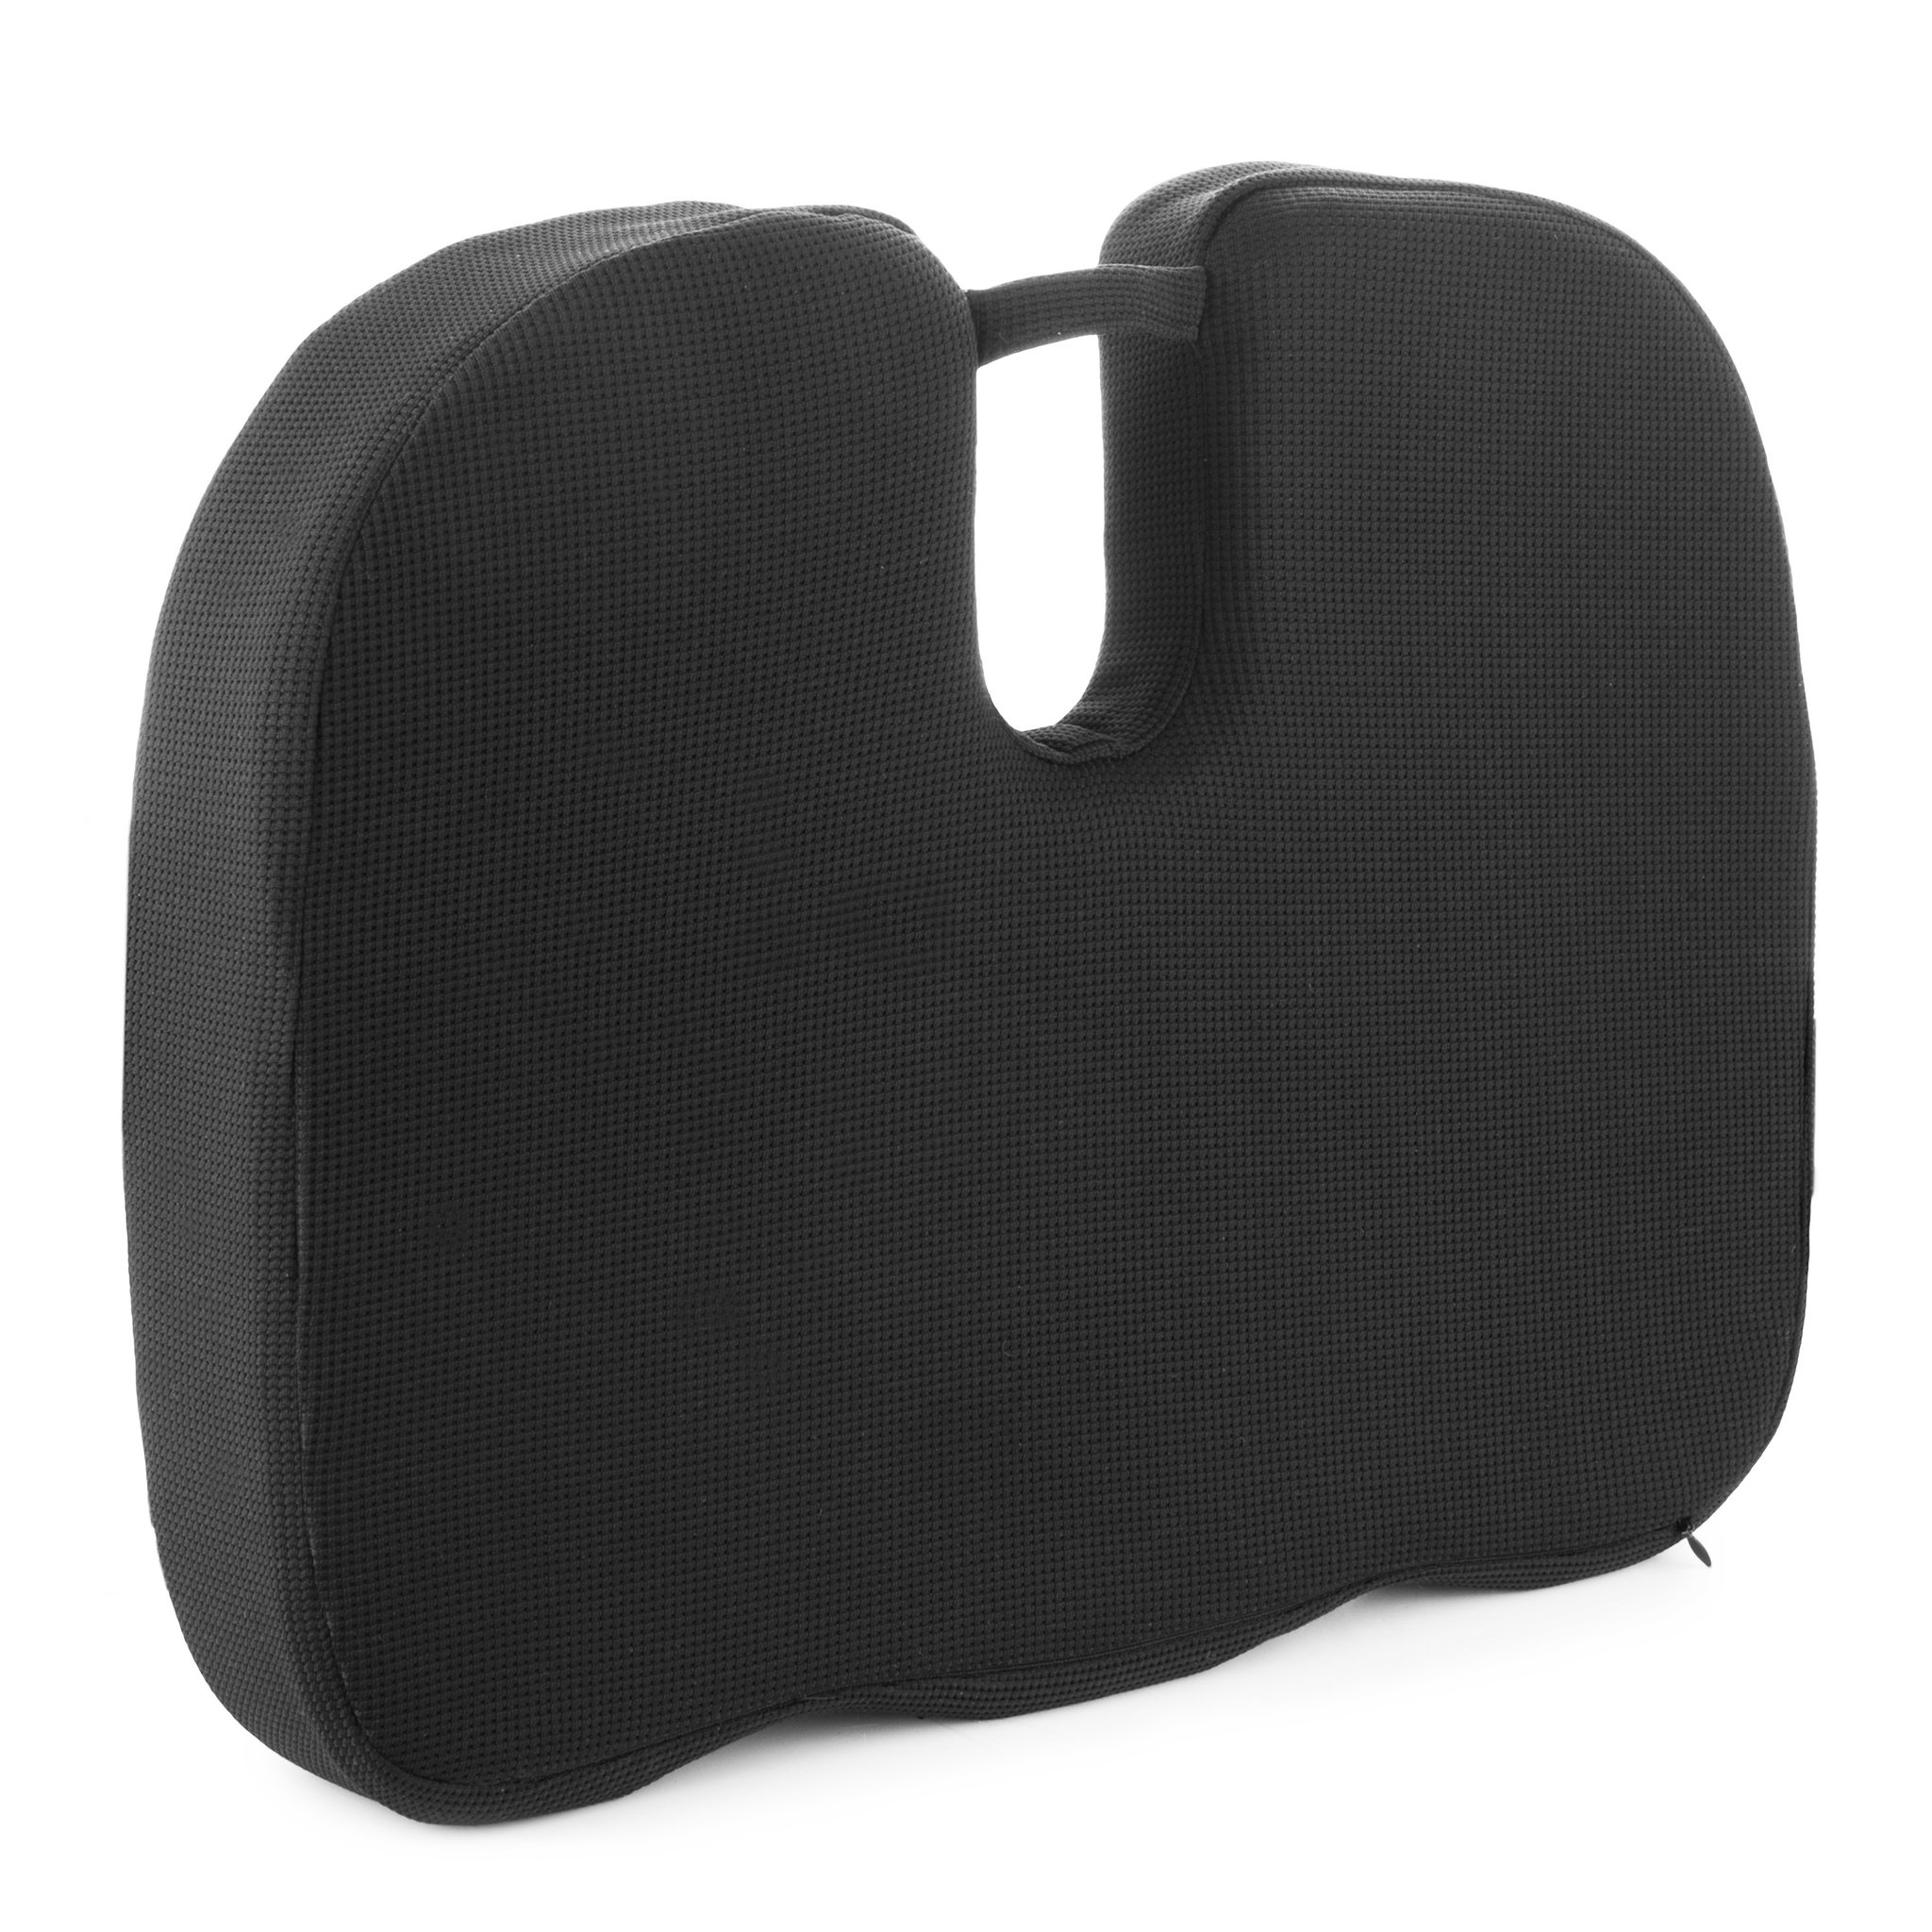 https://cs1.0ps.us/original/opplanet-wagan-relaxfusion-coccyx-cushion-black-one-size-in9113-main